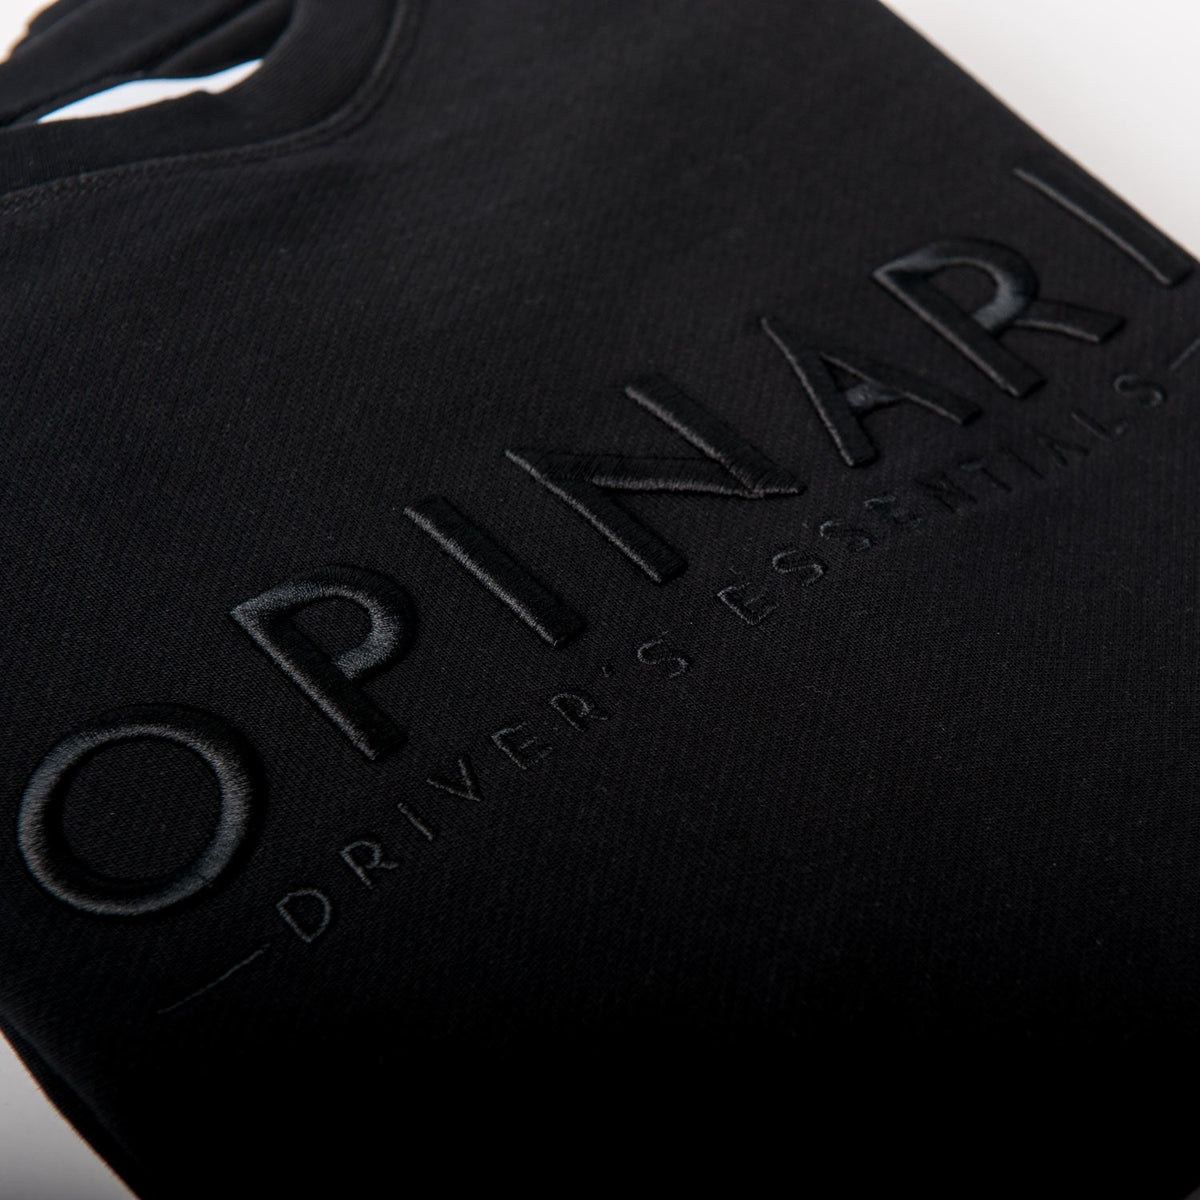 The ultimate Driver's wear: The OPINARI classic Sweat.